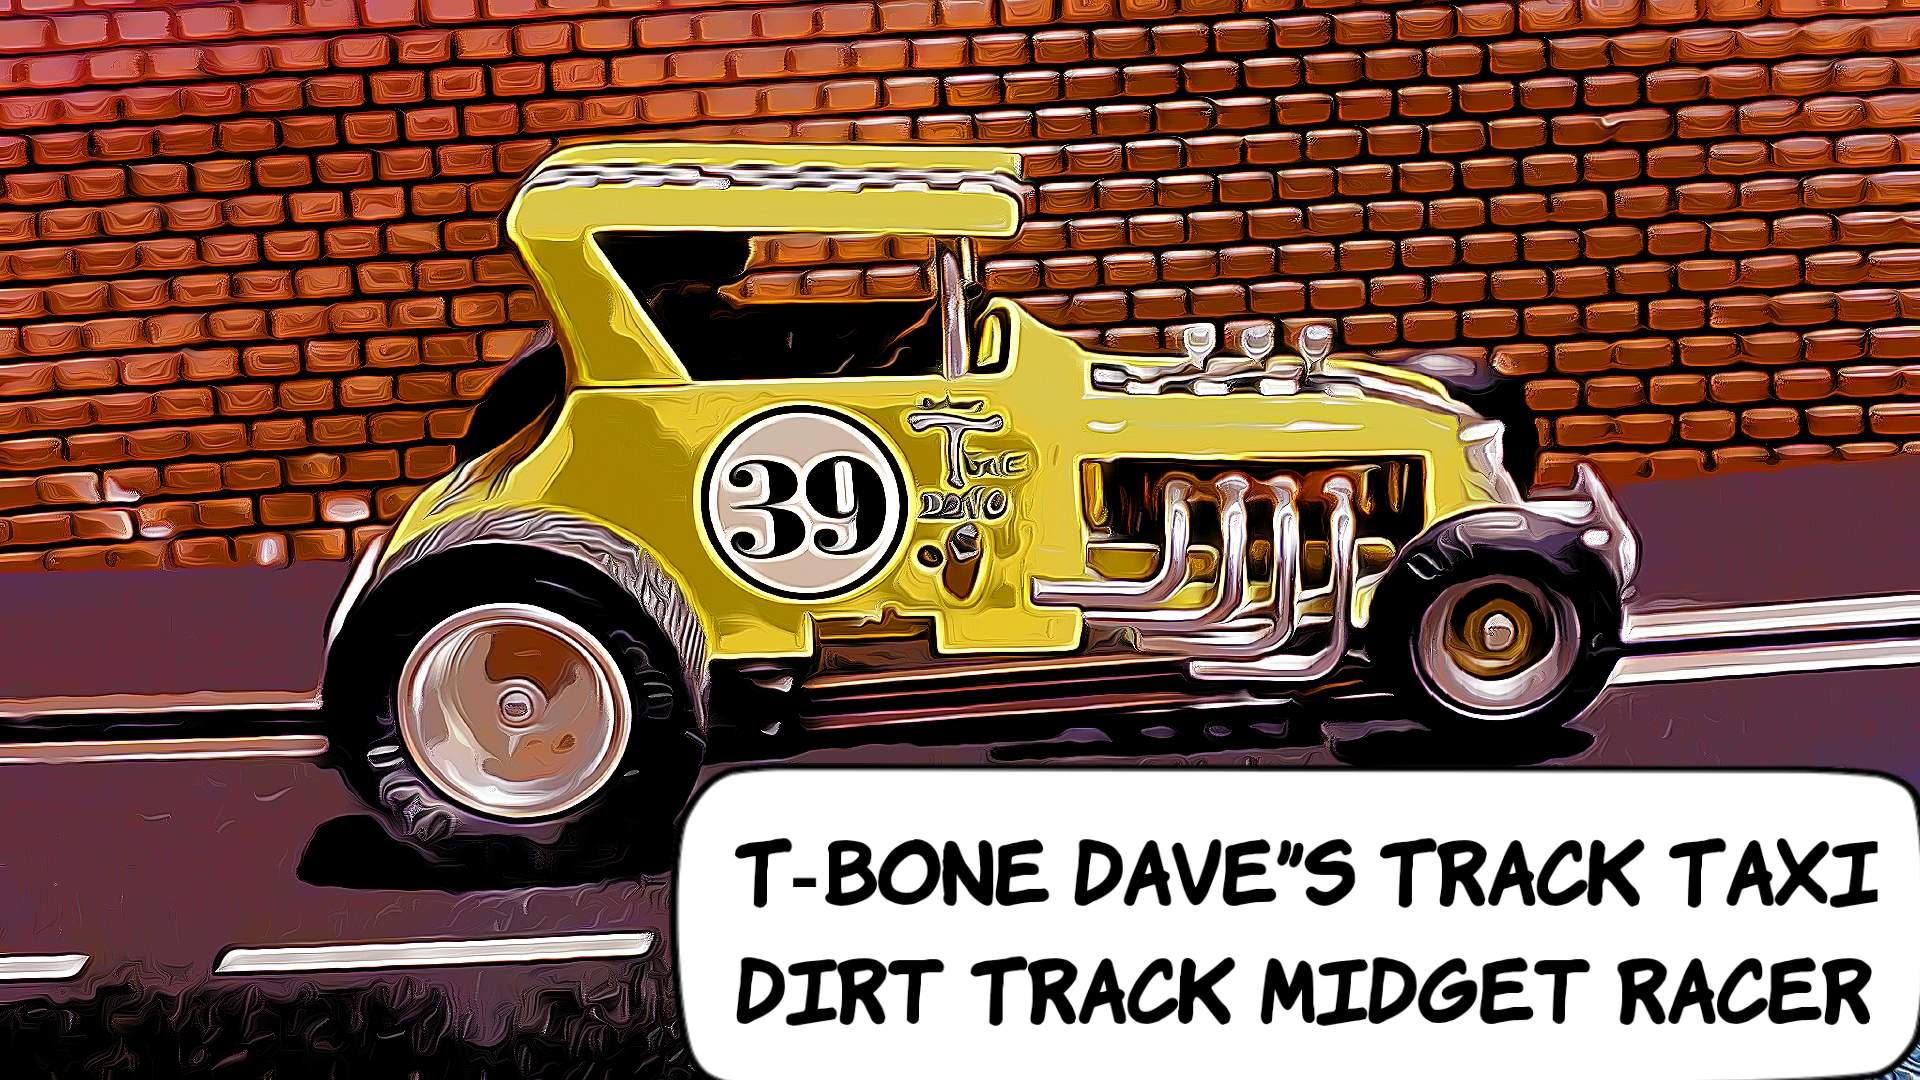 * Save $50 vs, our Ebay Store by buying here * Vintage Dirt Track Midget Racer 1/24 Scale T-Bone Dave’s Track Taxi Slot Car #39